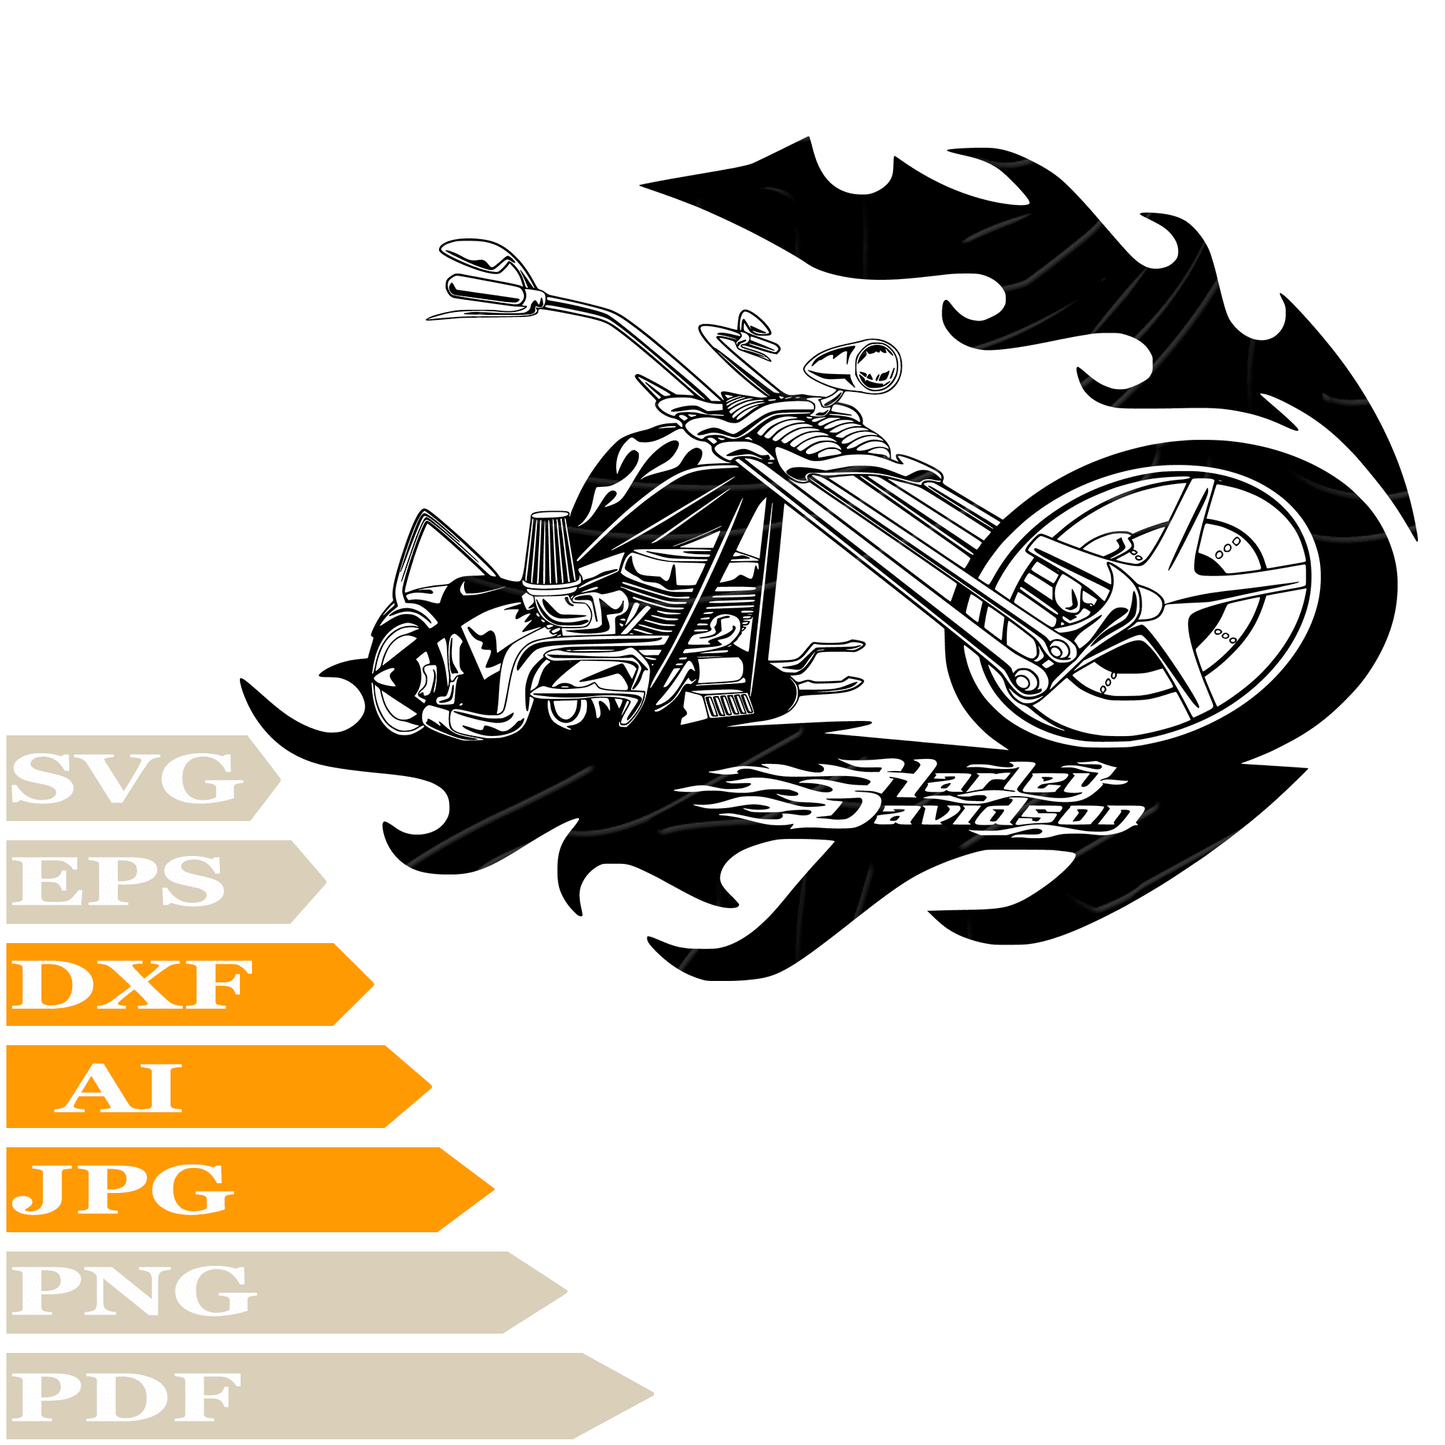 Motorcycles SVG File-Harley Davidson Personalized SVG-Motorcycles Harley Davidson Logo Drawing SVG-Motorcycles Vector ClipArt's-SVG Cut Files-Illustration-PNG-Decal-Circuit-Digital Files-For Shirts-Silhouette